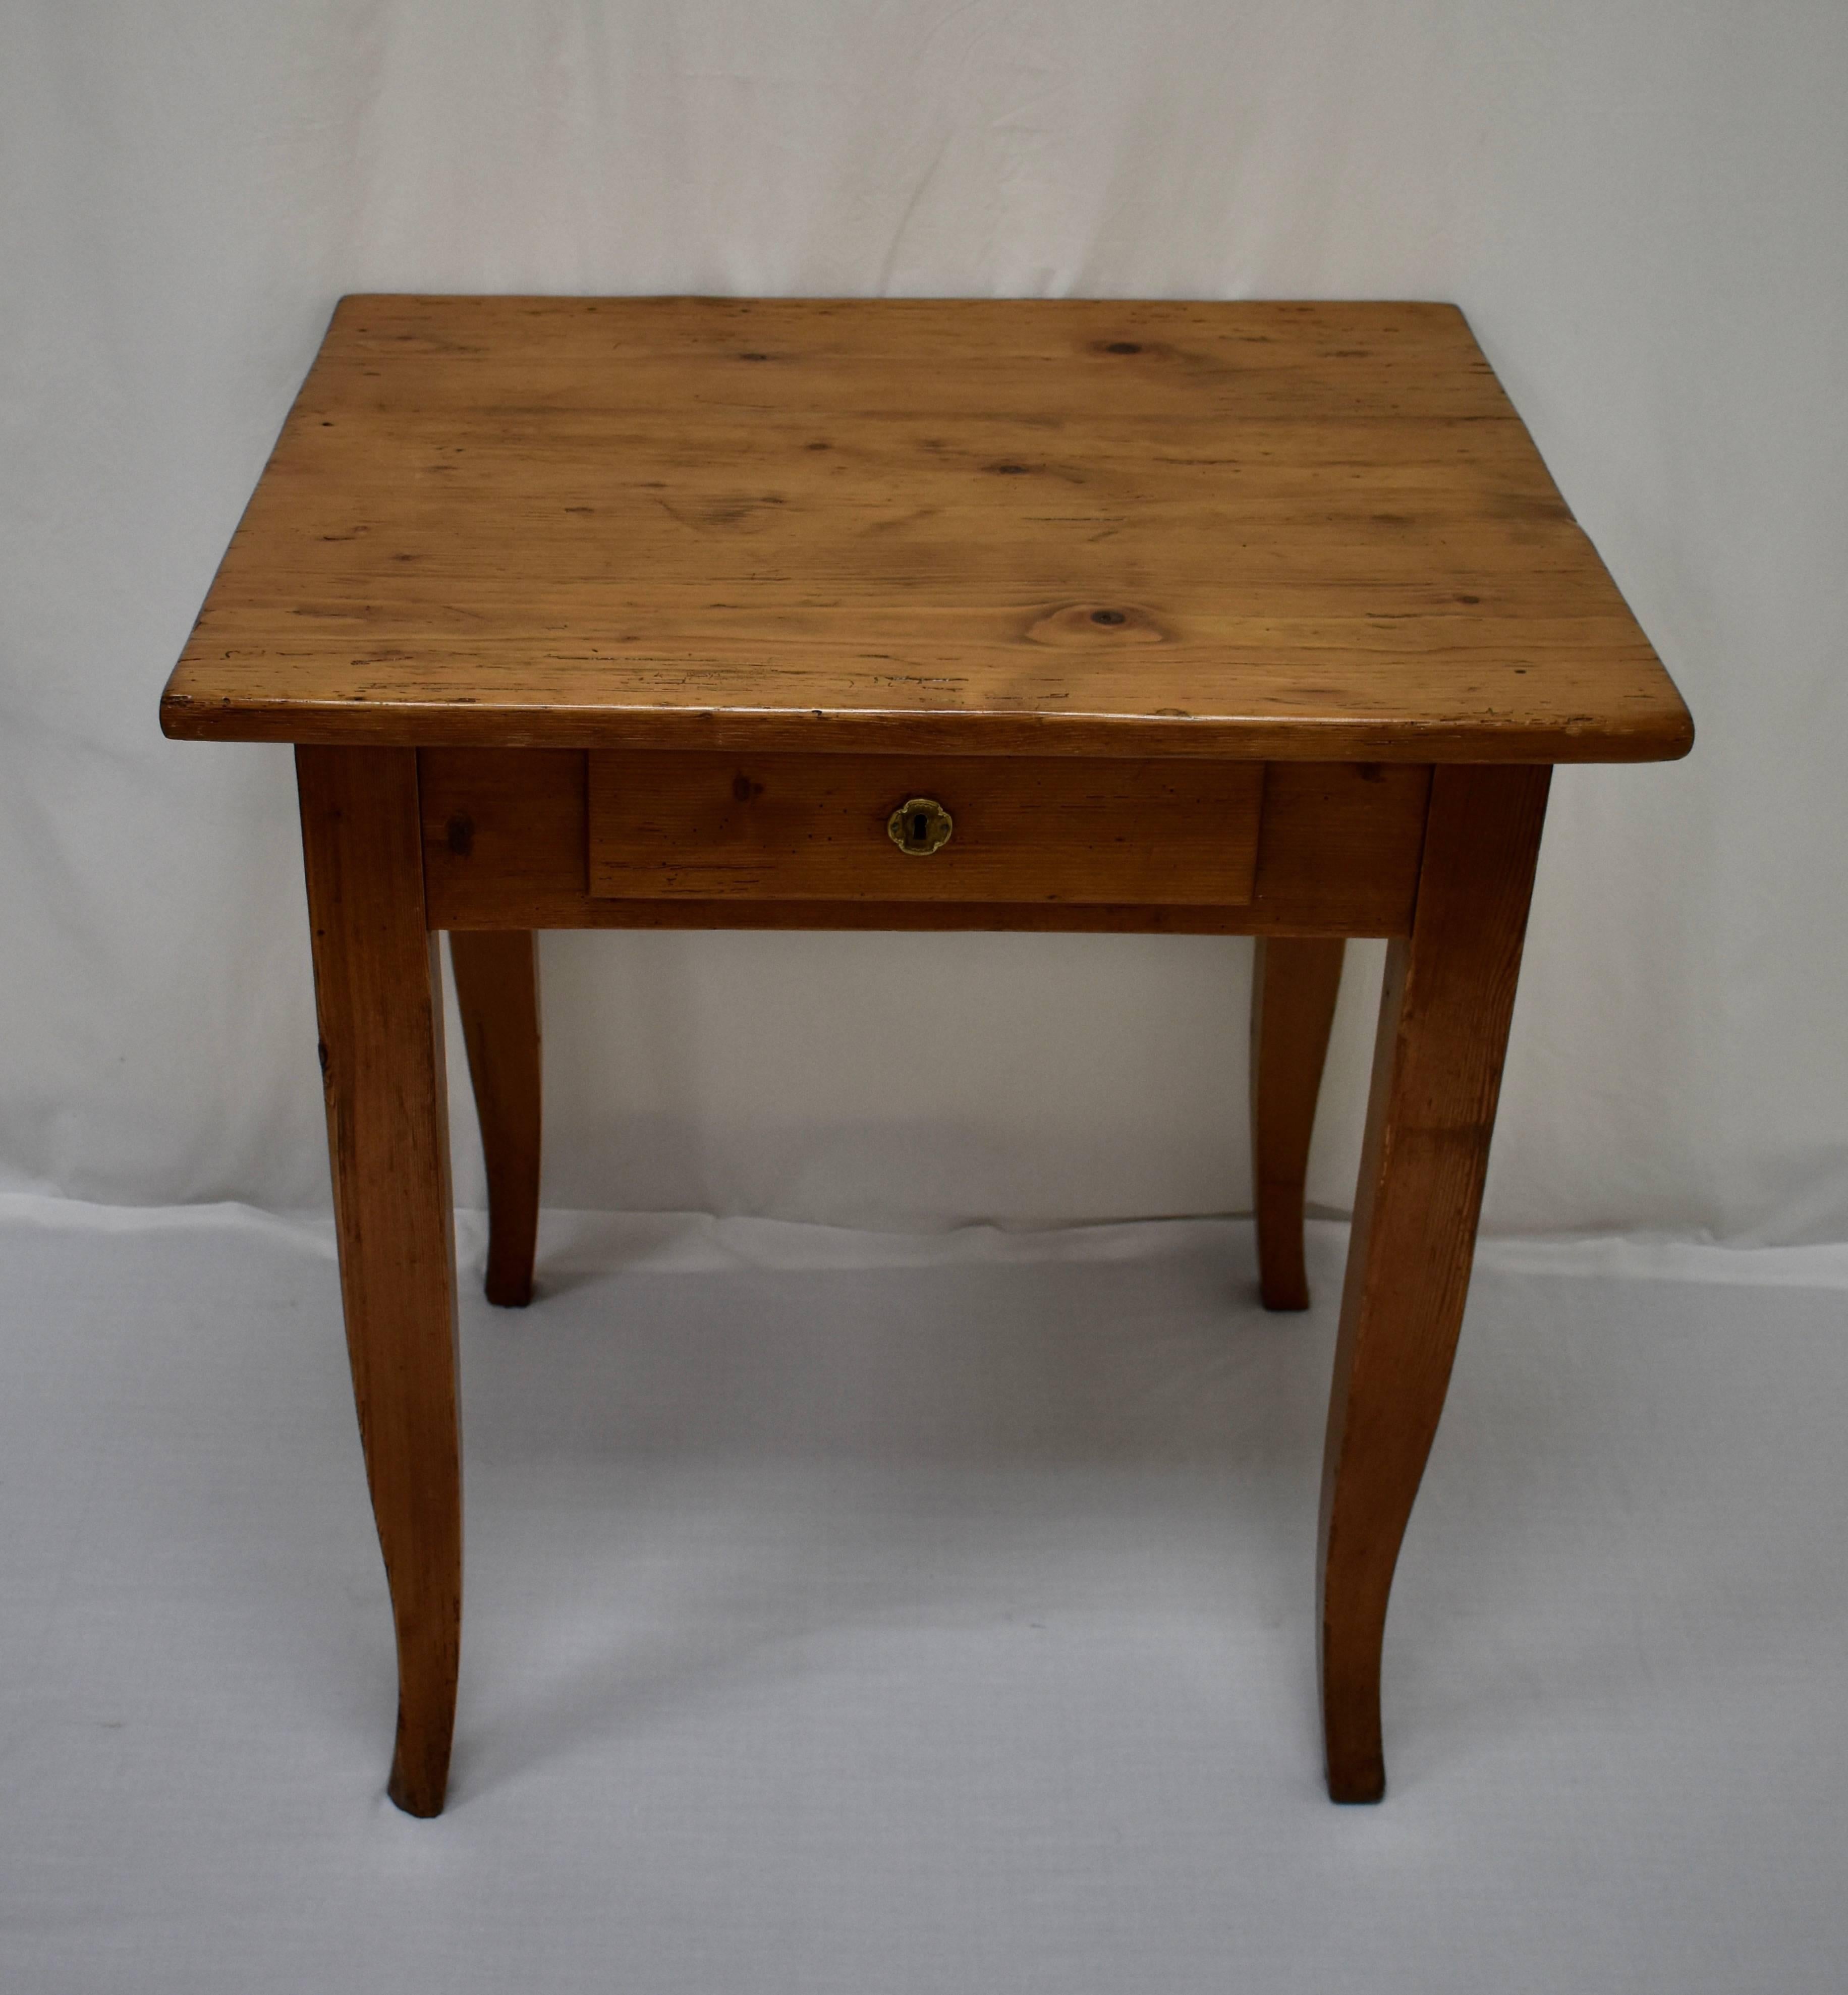 This lovely little writing table has a 1” thick three board top which has been beautifully naturally distressed over decades of purposeful use. The base features an overlay pencil drawer, with an interior depth of 18”, and a pretty pressed brass